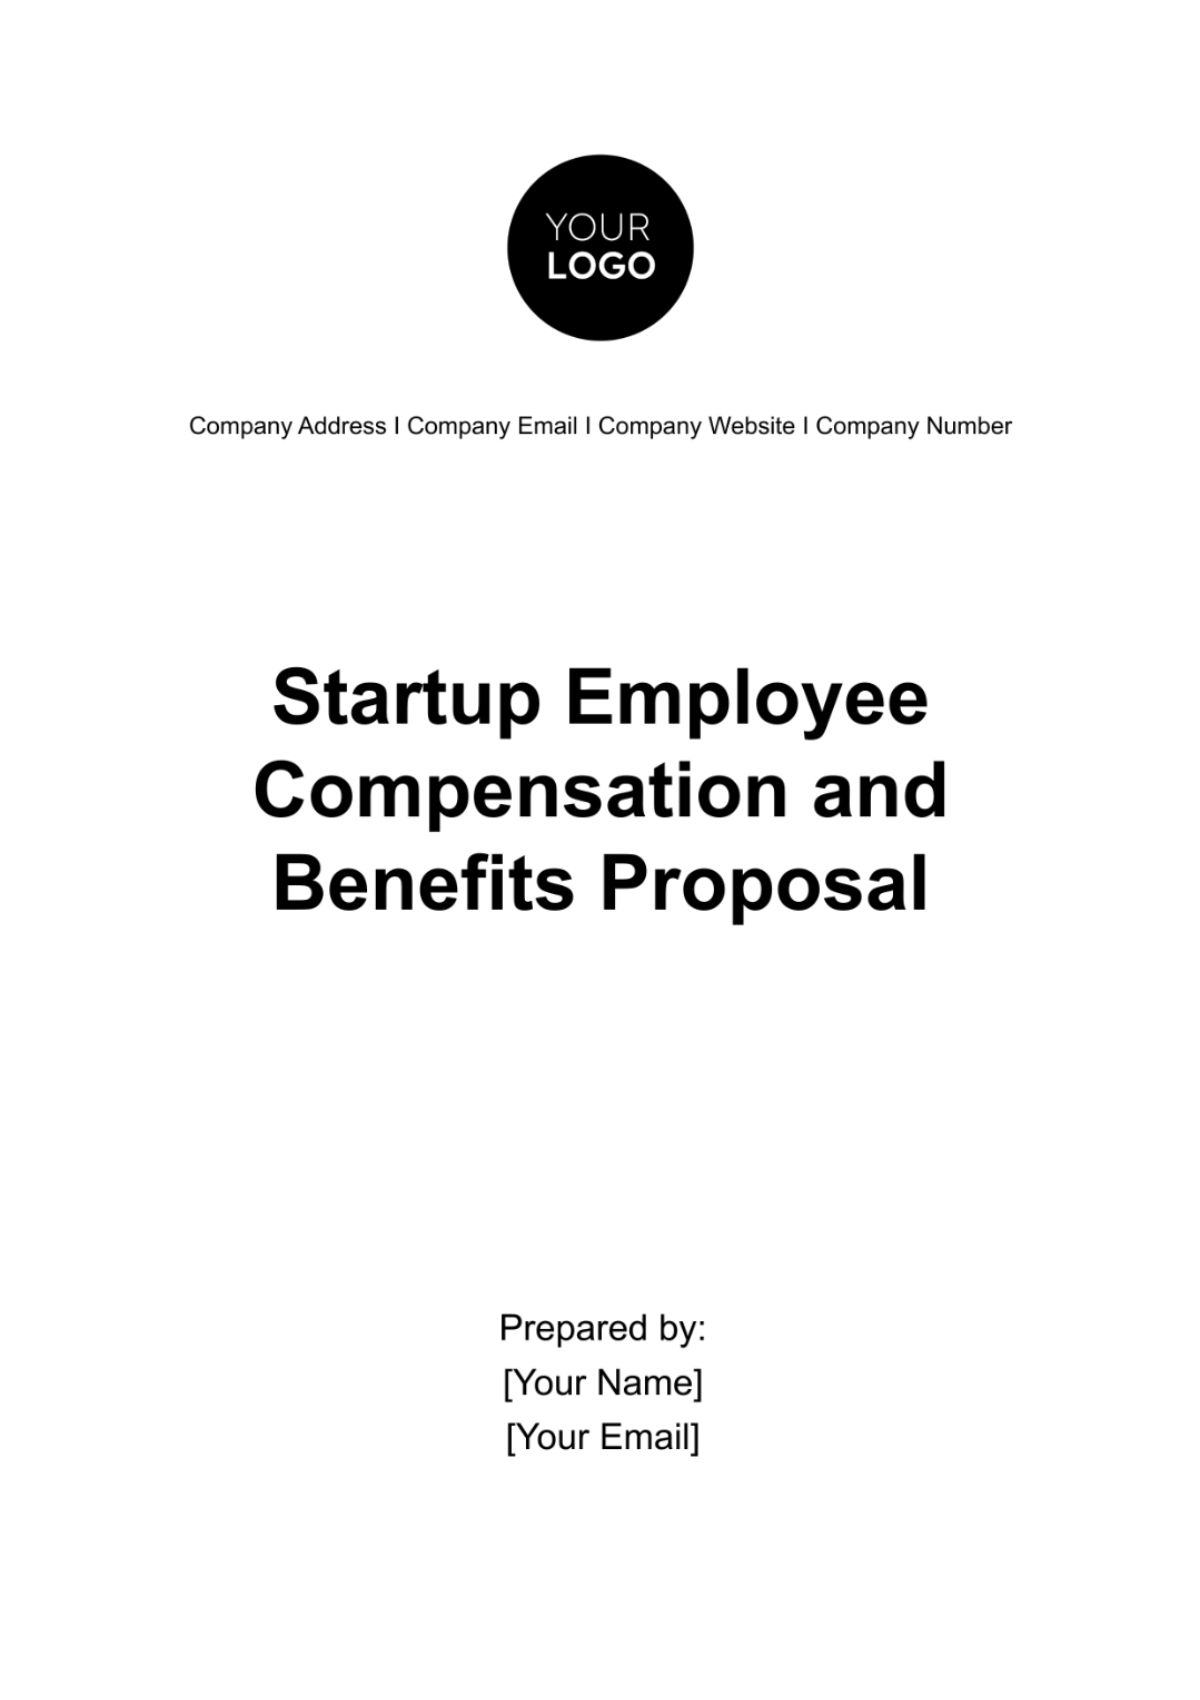 Startup Employee Compensation and Benefits Proposal Template